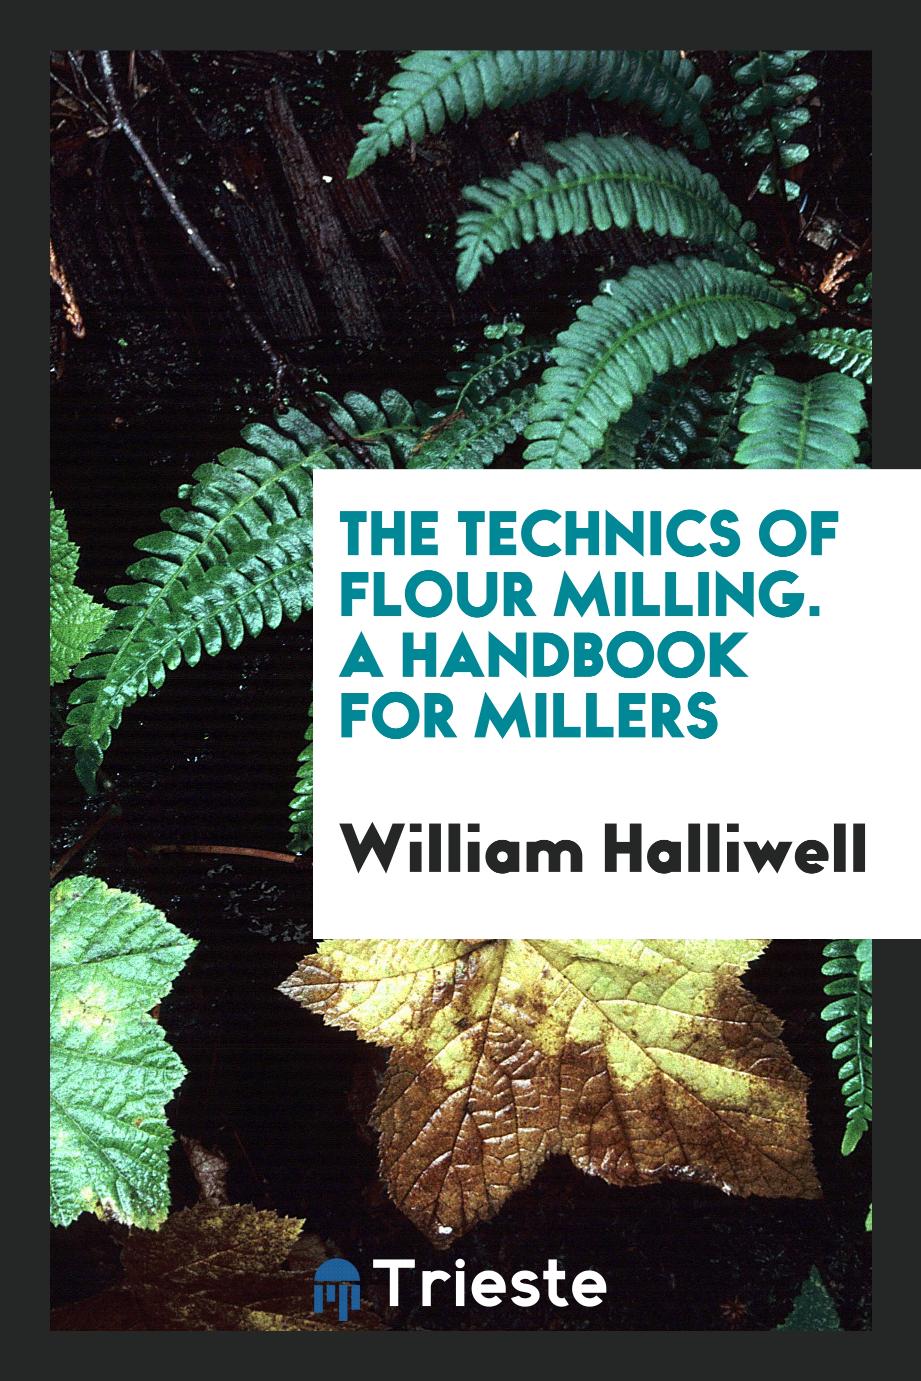 The Technics of Flour Milling. A Handbook for Millers